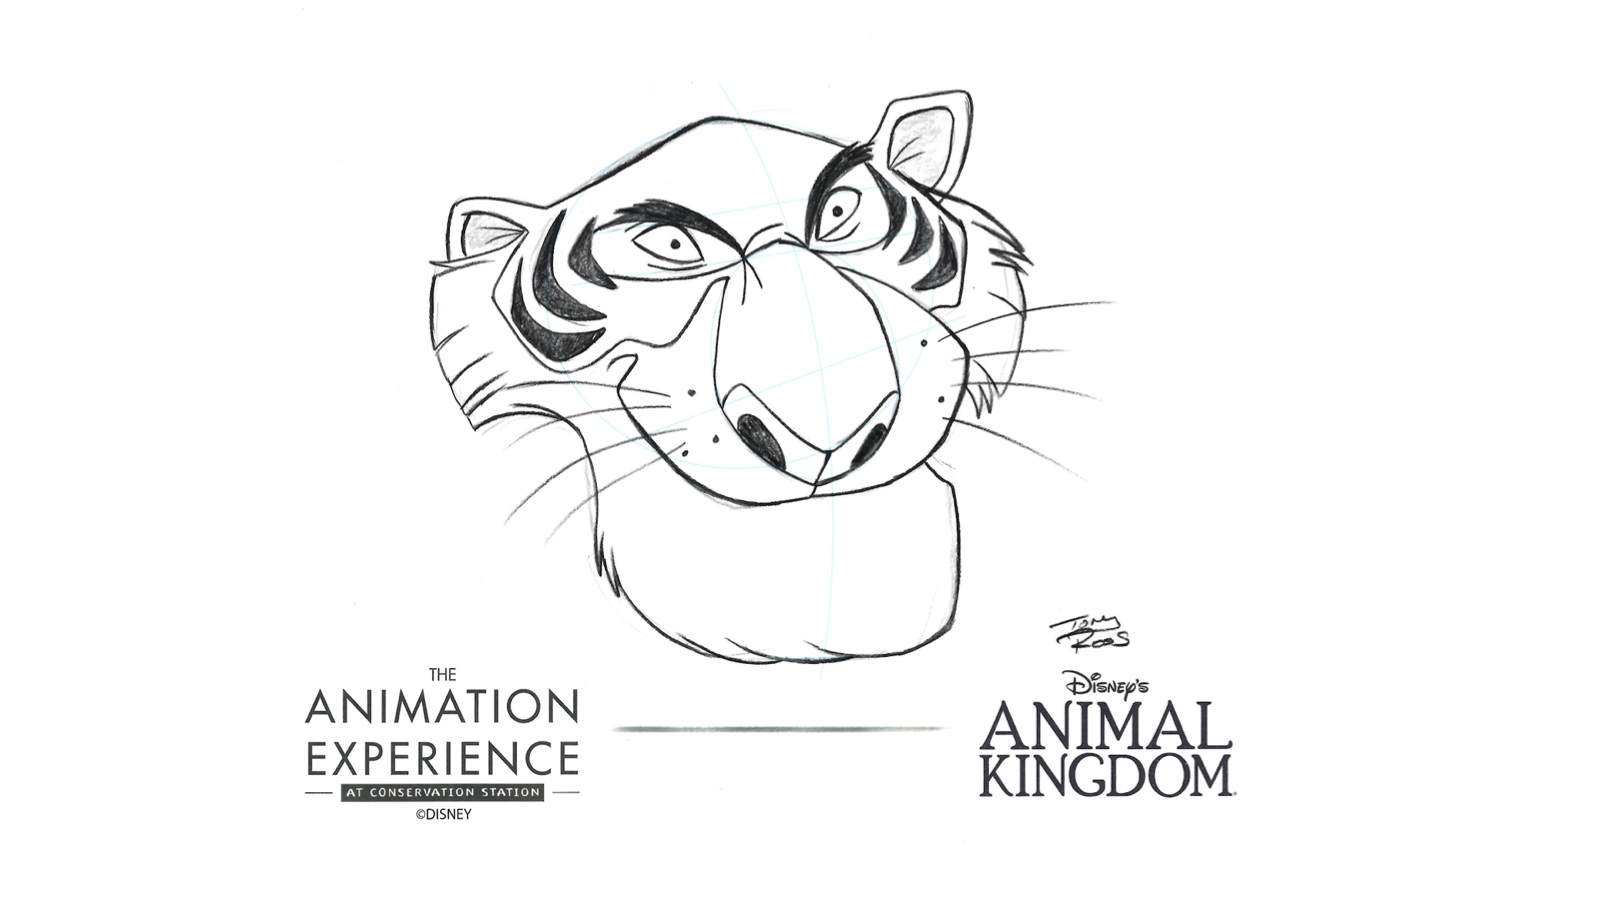 The Animation Experience